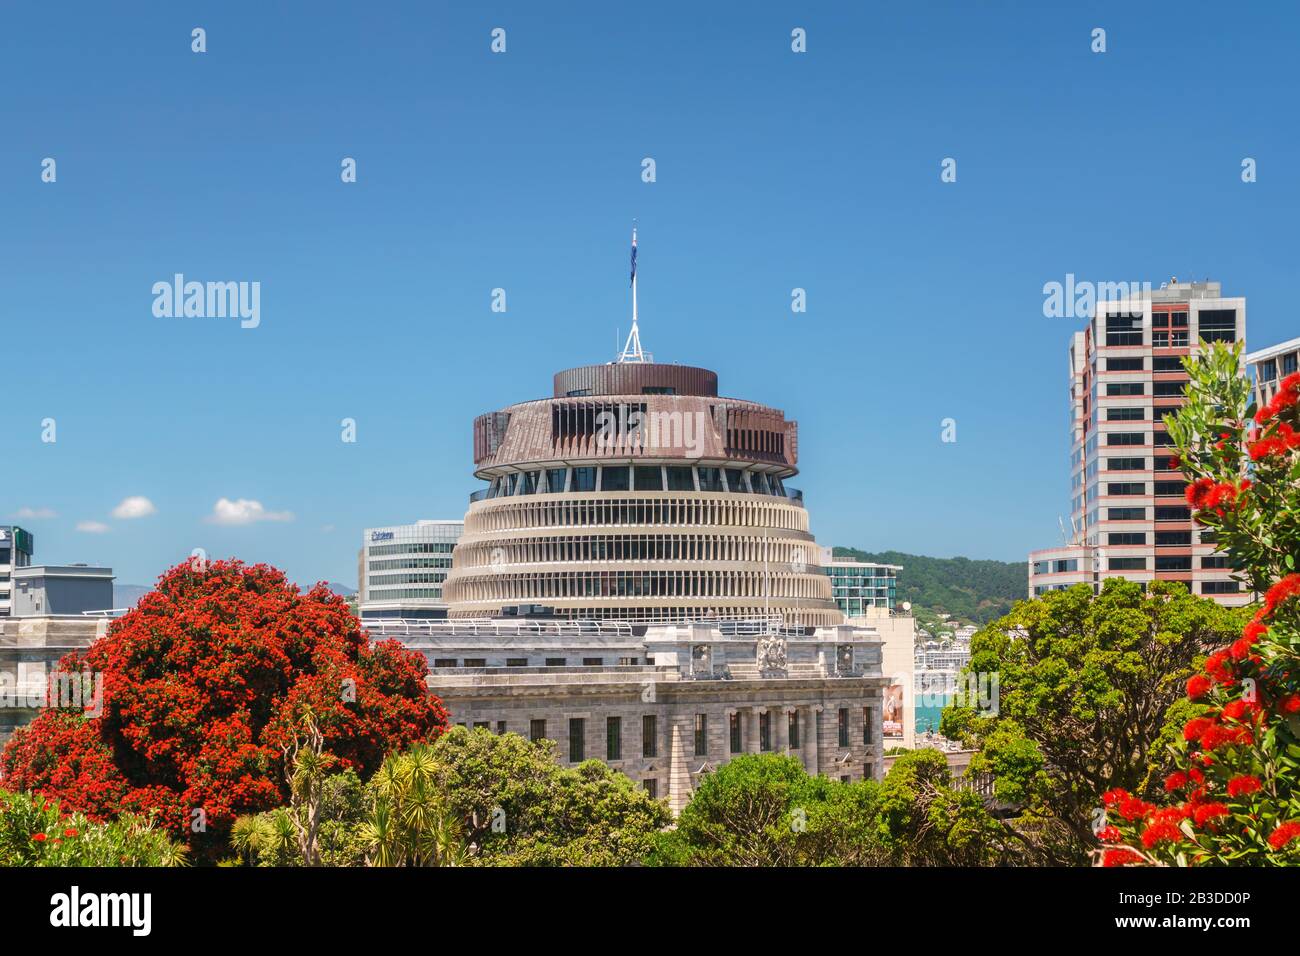 Parliament buildings located in Wellington, New Zealand. The Executive Wing is a distinctive shape and is commonly referred to as The Beehive. Stock Photo